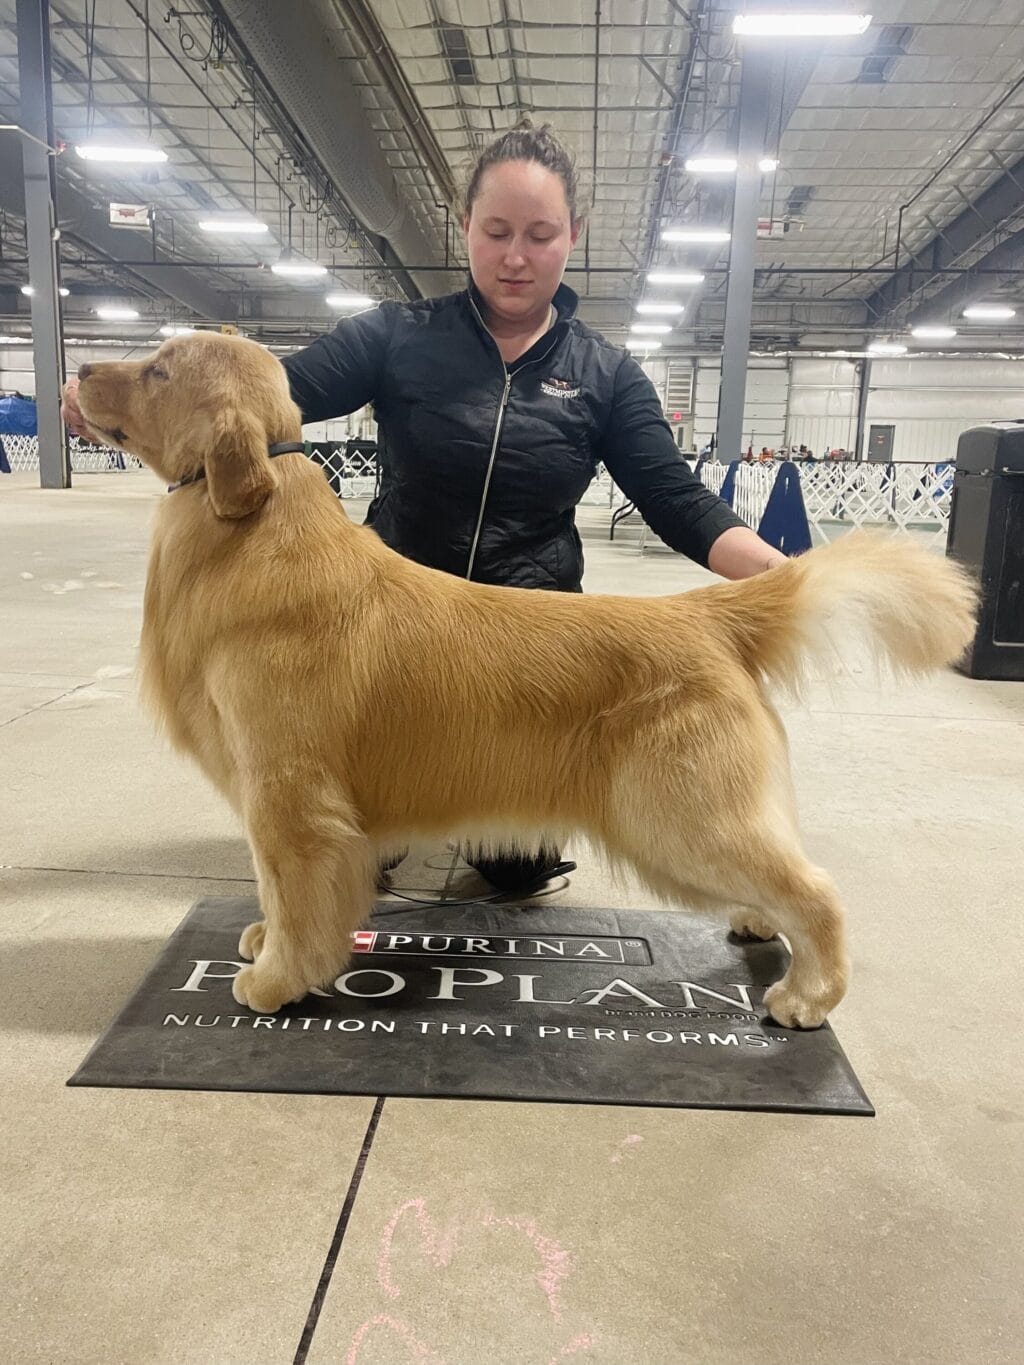 Photo of BVISS CH Forever’s Dirt On My Boots CD RA CGC, a  Golden Retriever.